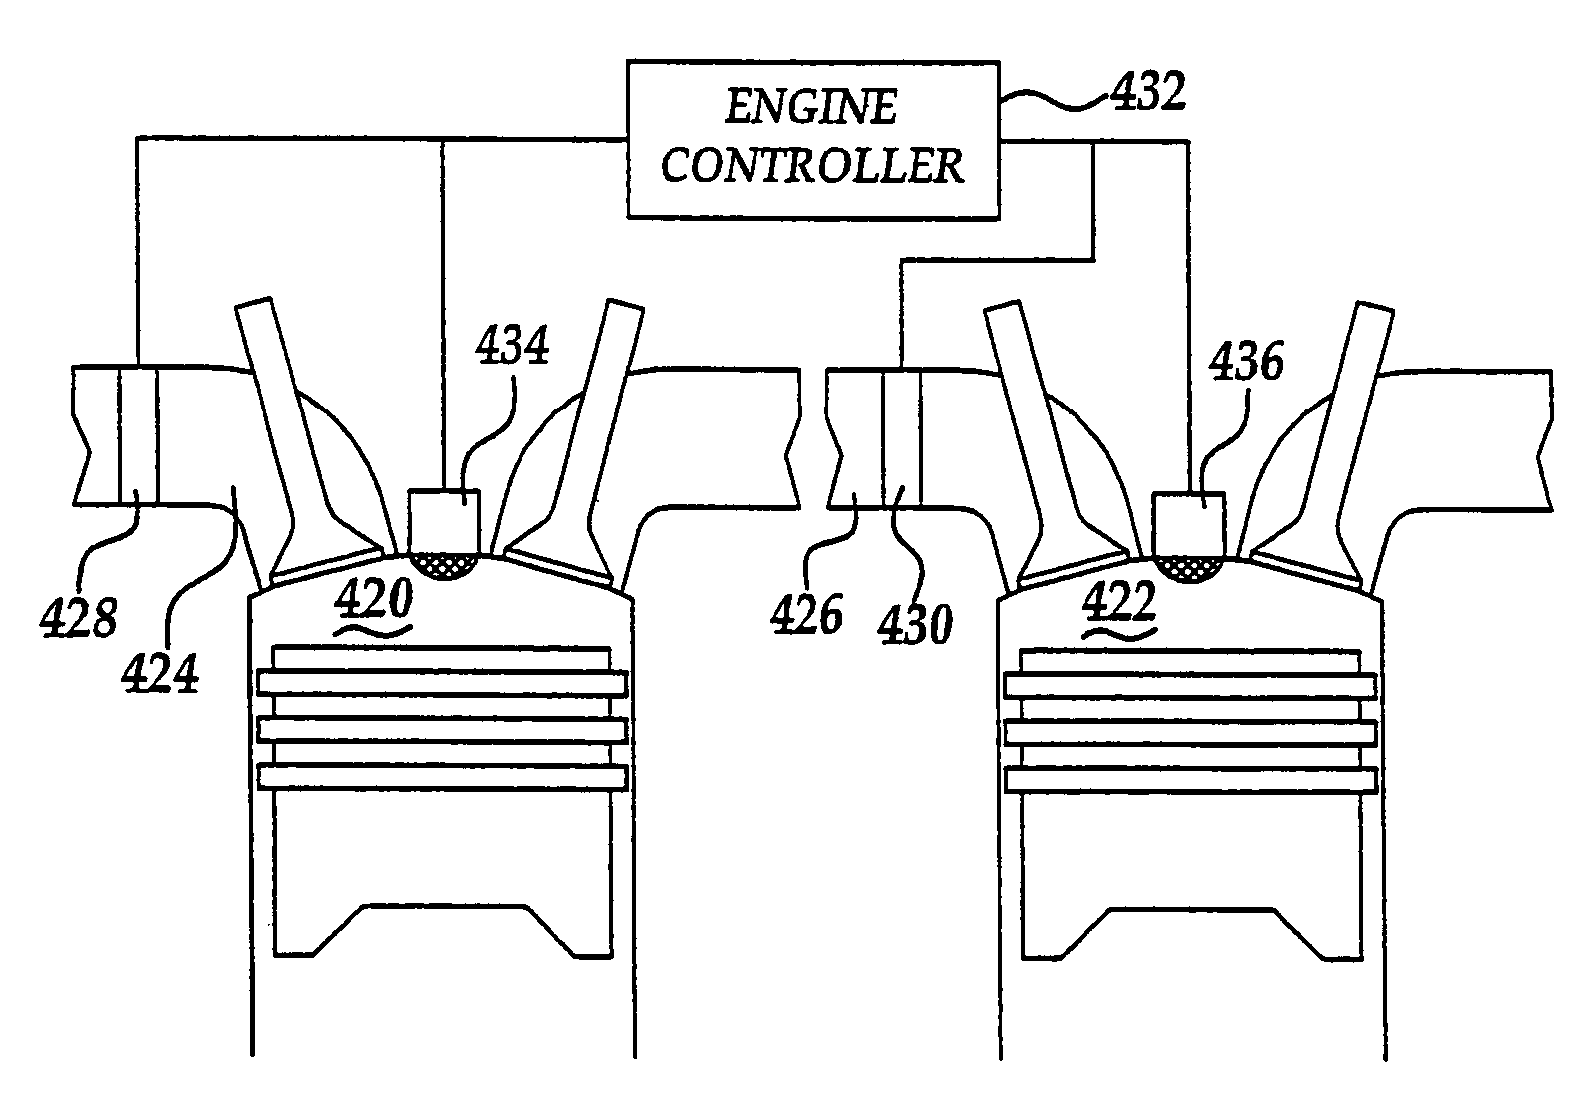 Homogenous charge compression ignition and barrel engines